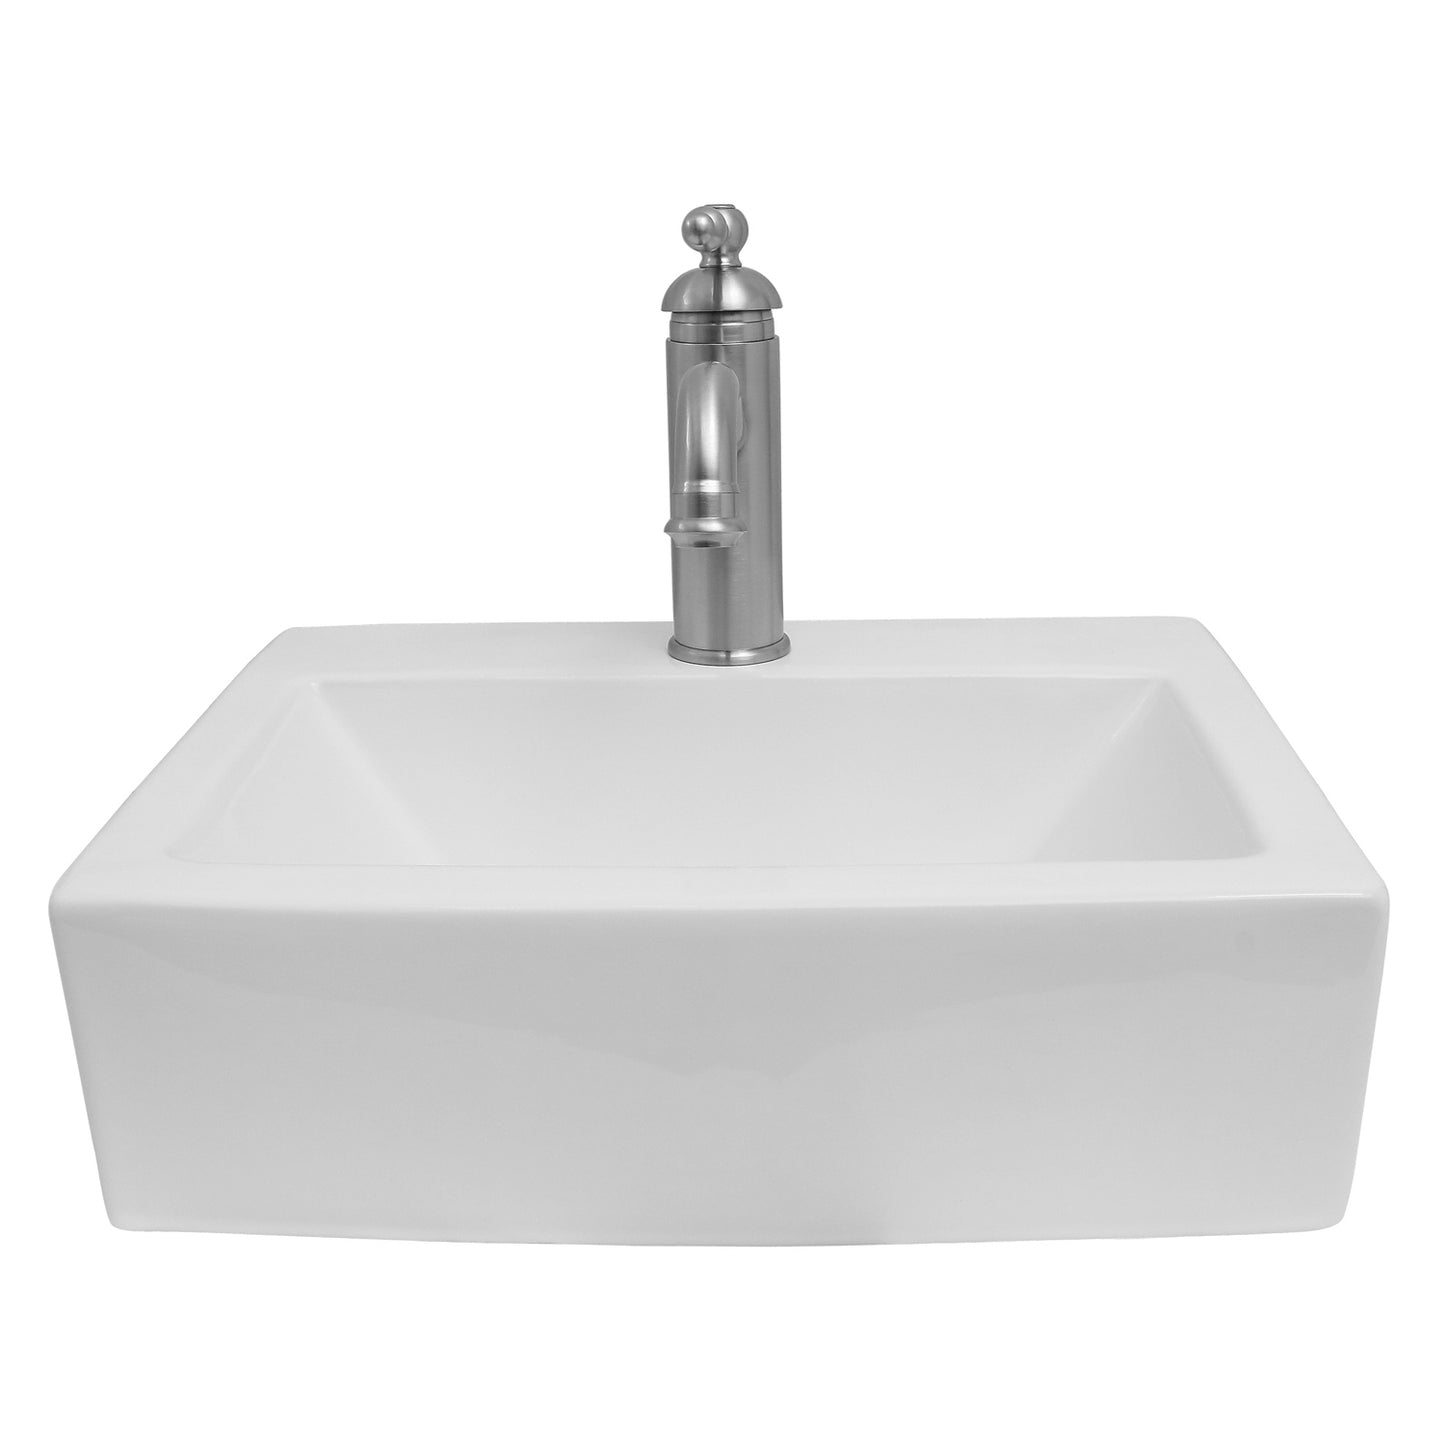 Sophie 17" Rectangular Wall Hung Bathroom Sink White 1 Faucet Hole